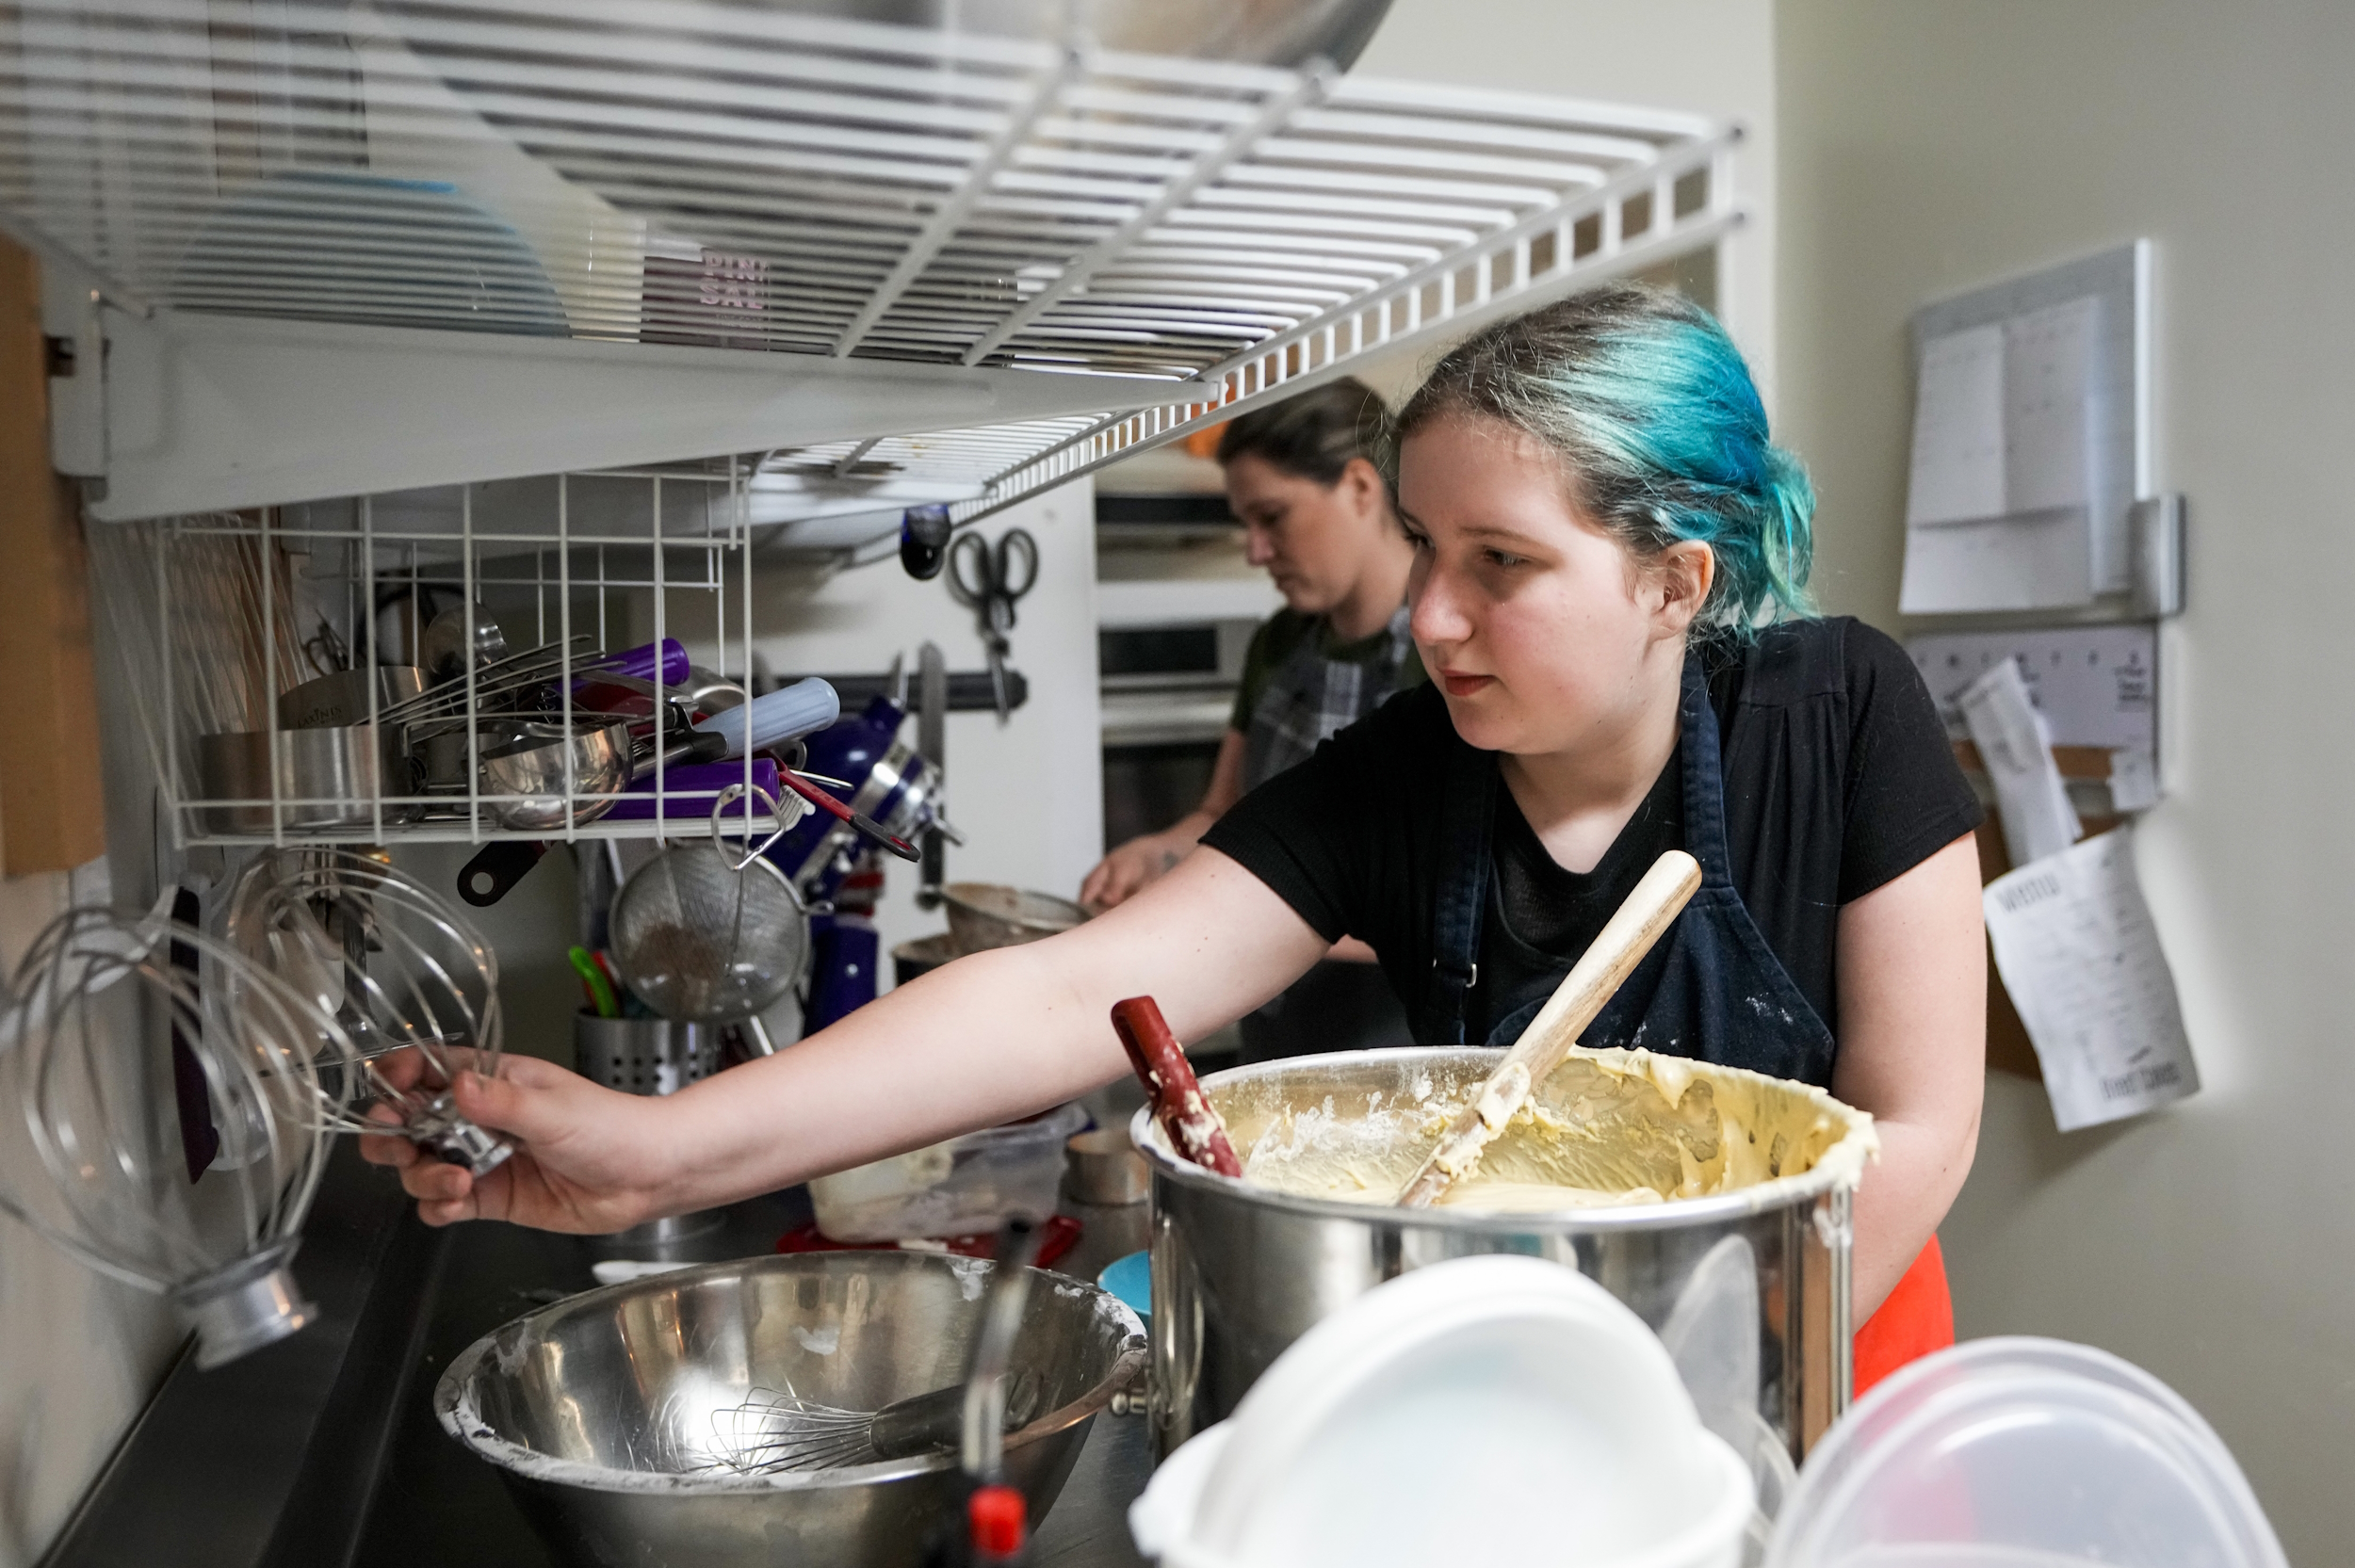 Disabled students' shorter school days: Teen girl with turquoise hair pulled back wearing black t-shirt reaches across several stainless steel mixing bowls for baking tools hanging on the wall in a commercial kitchen.